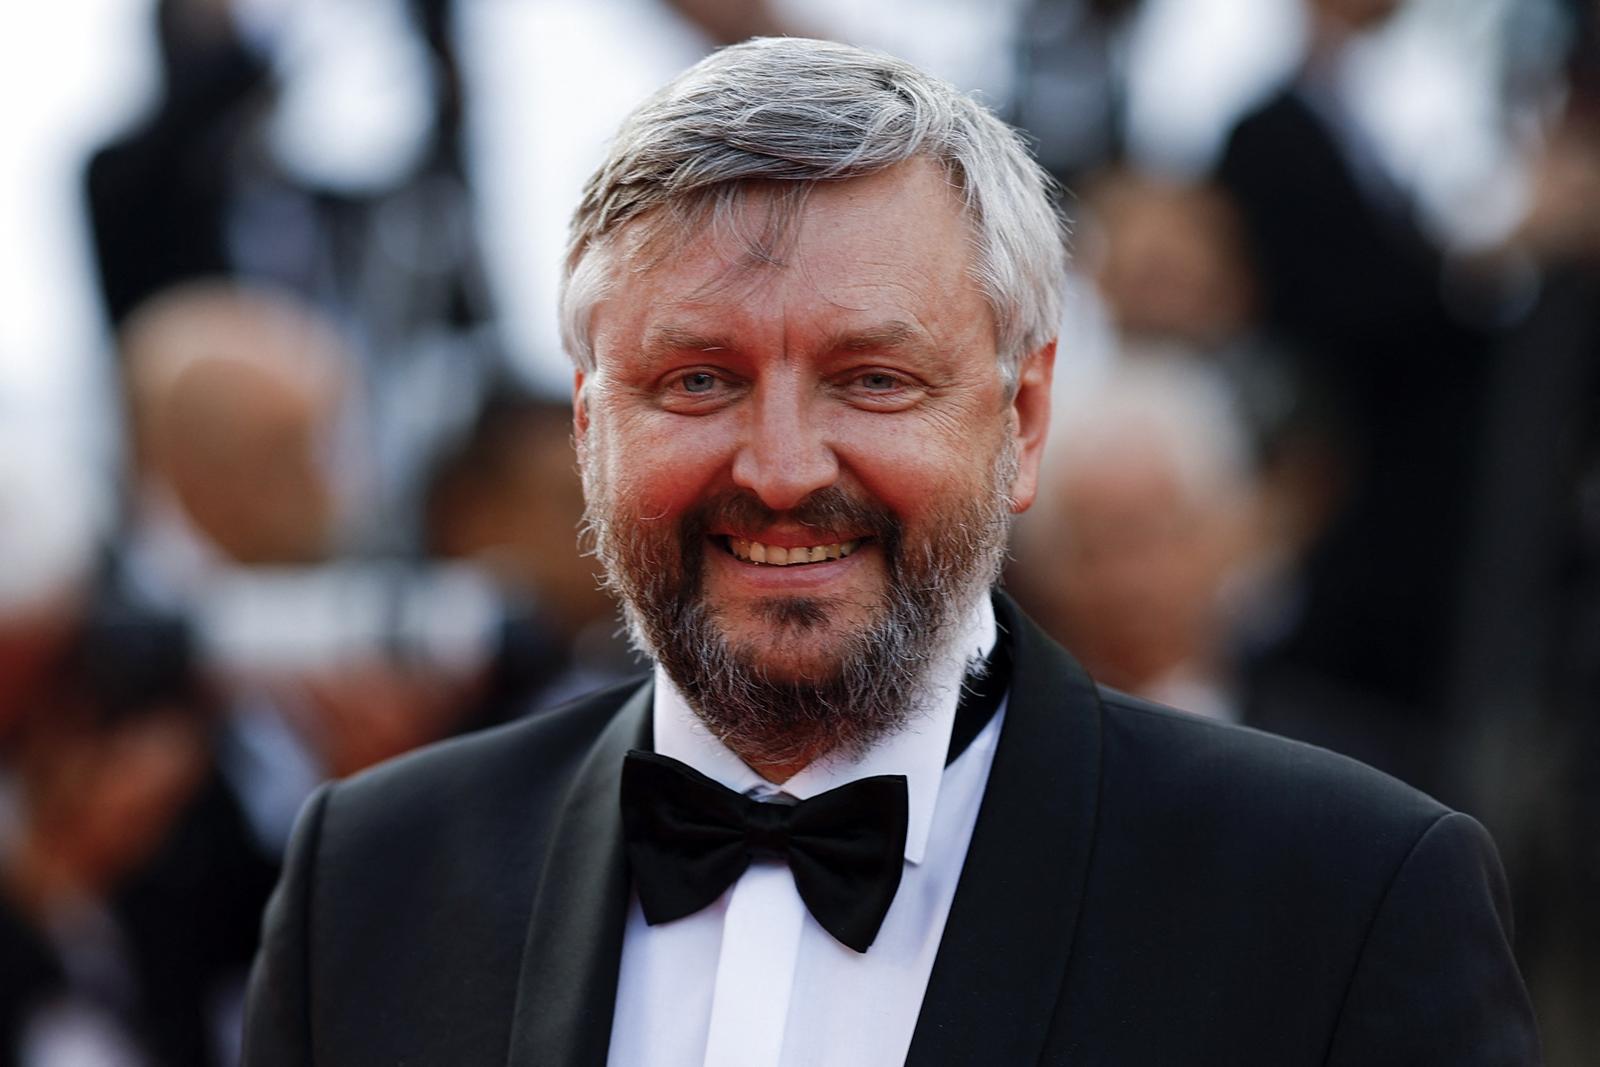 The 75th Cannes Film Festival - Closing ceremony - Red Carpet Arrivals - Cannes, France, May 28, 2022. Sergei Loznitsa poses. REUTERS/Stephane Mahe Photo: STEPHANE MAHE/REUTERS